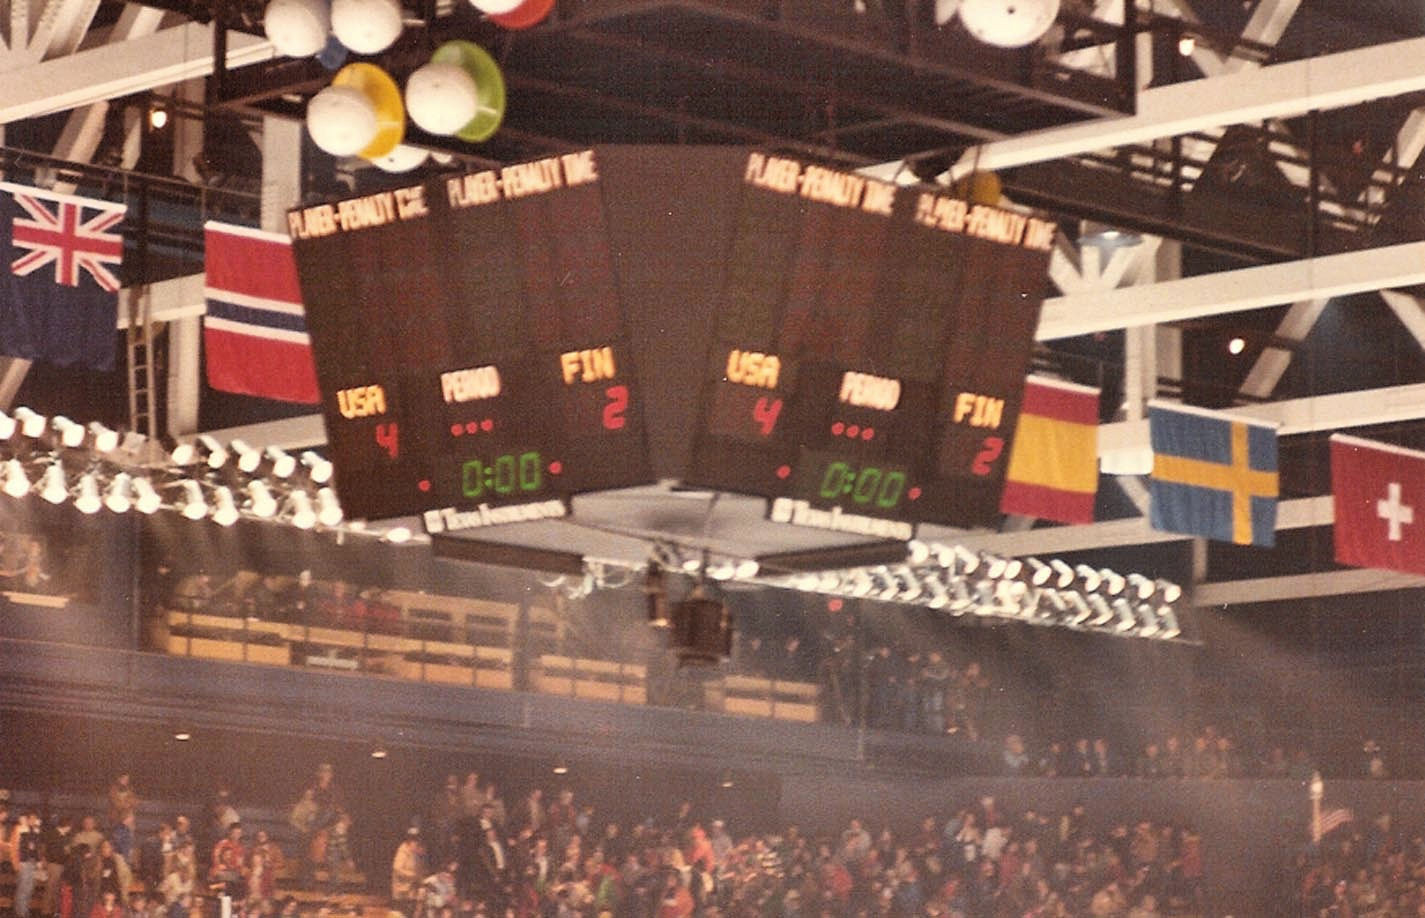 The scoreboard from the "Miracle on Ice" will be on permanent display in the museum ©Twitter